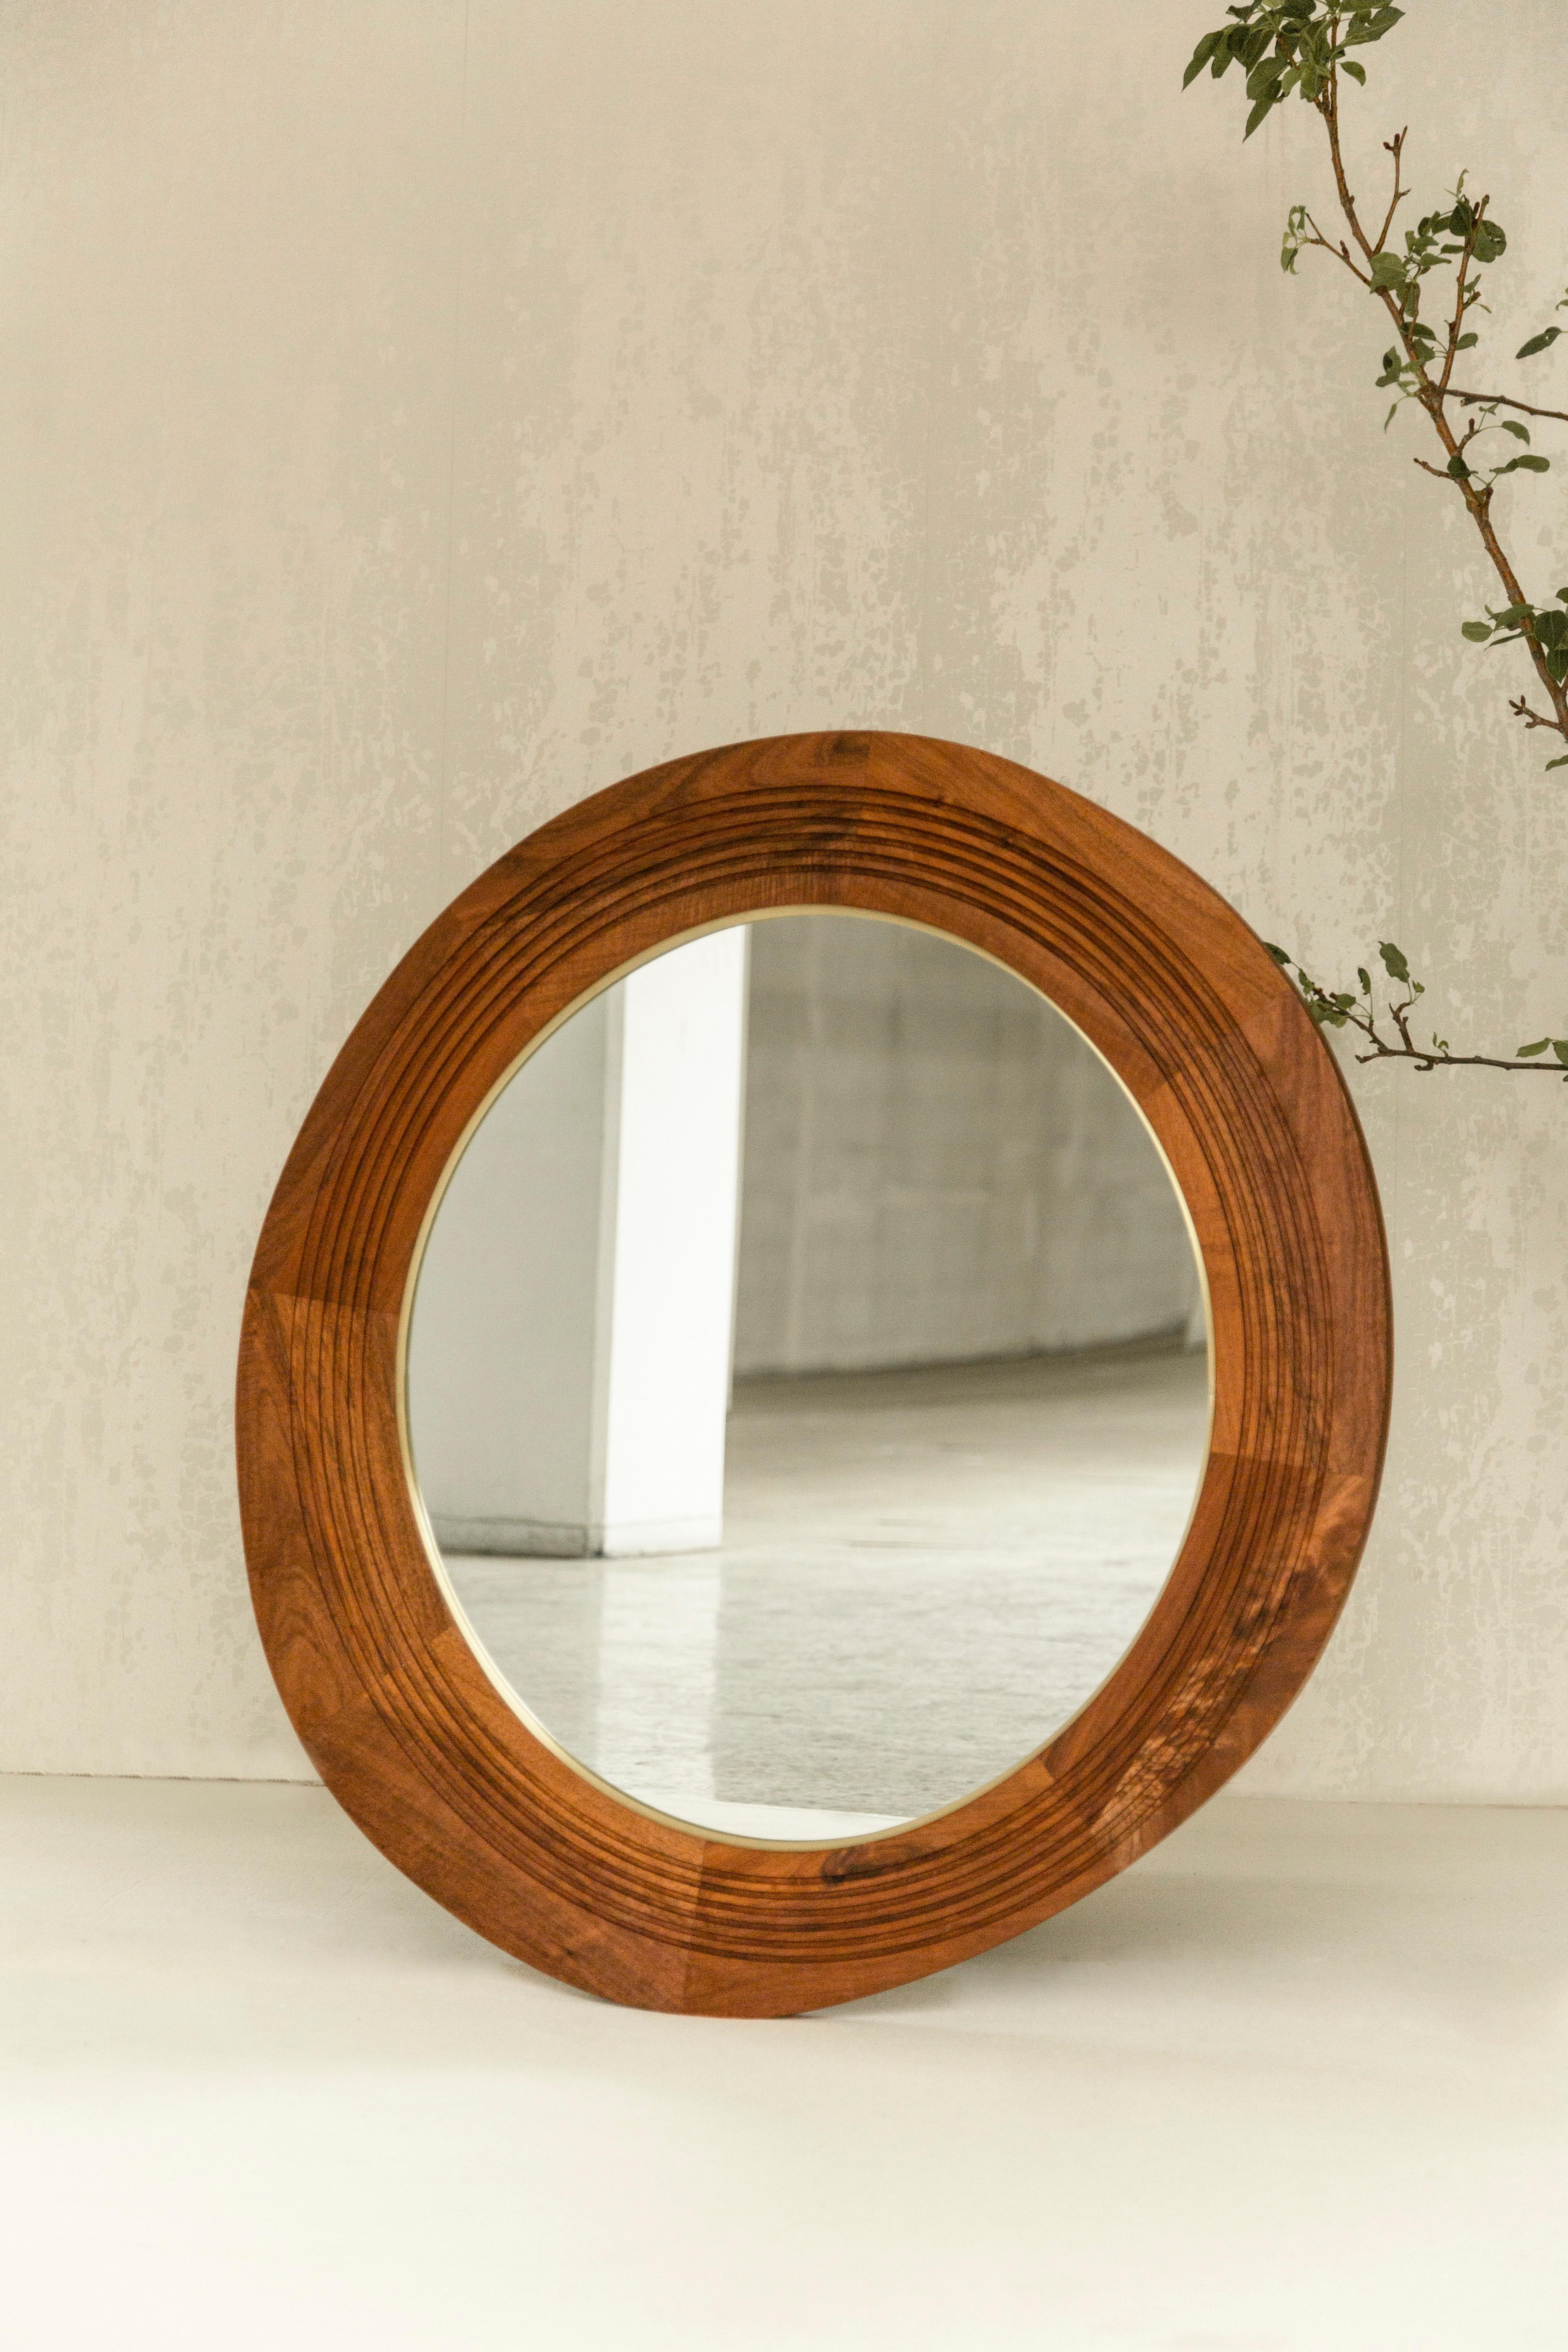 The Joseph mirror is a great accent to dress any wall. The asymmetric oval shape of the frame gives an interesting tension and contrast with the symmetric oval brass ring and mirror. The mirror has different layers of details, as you get closer you